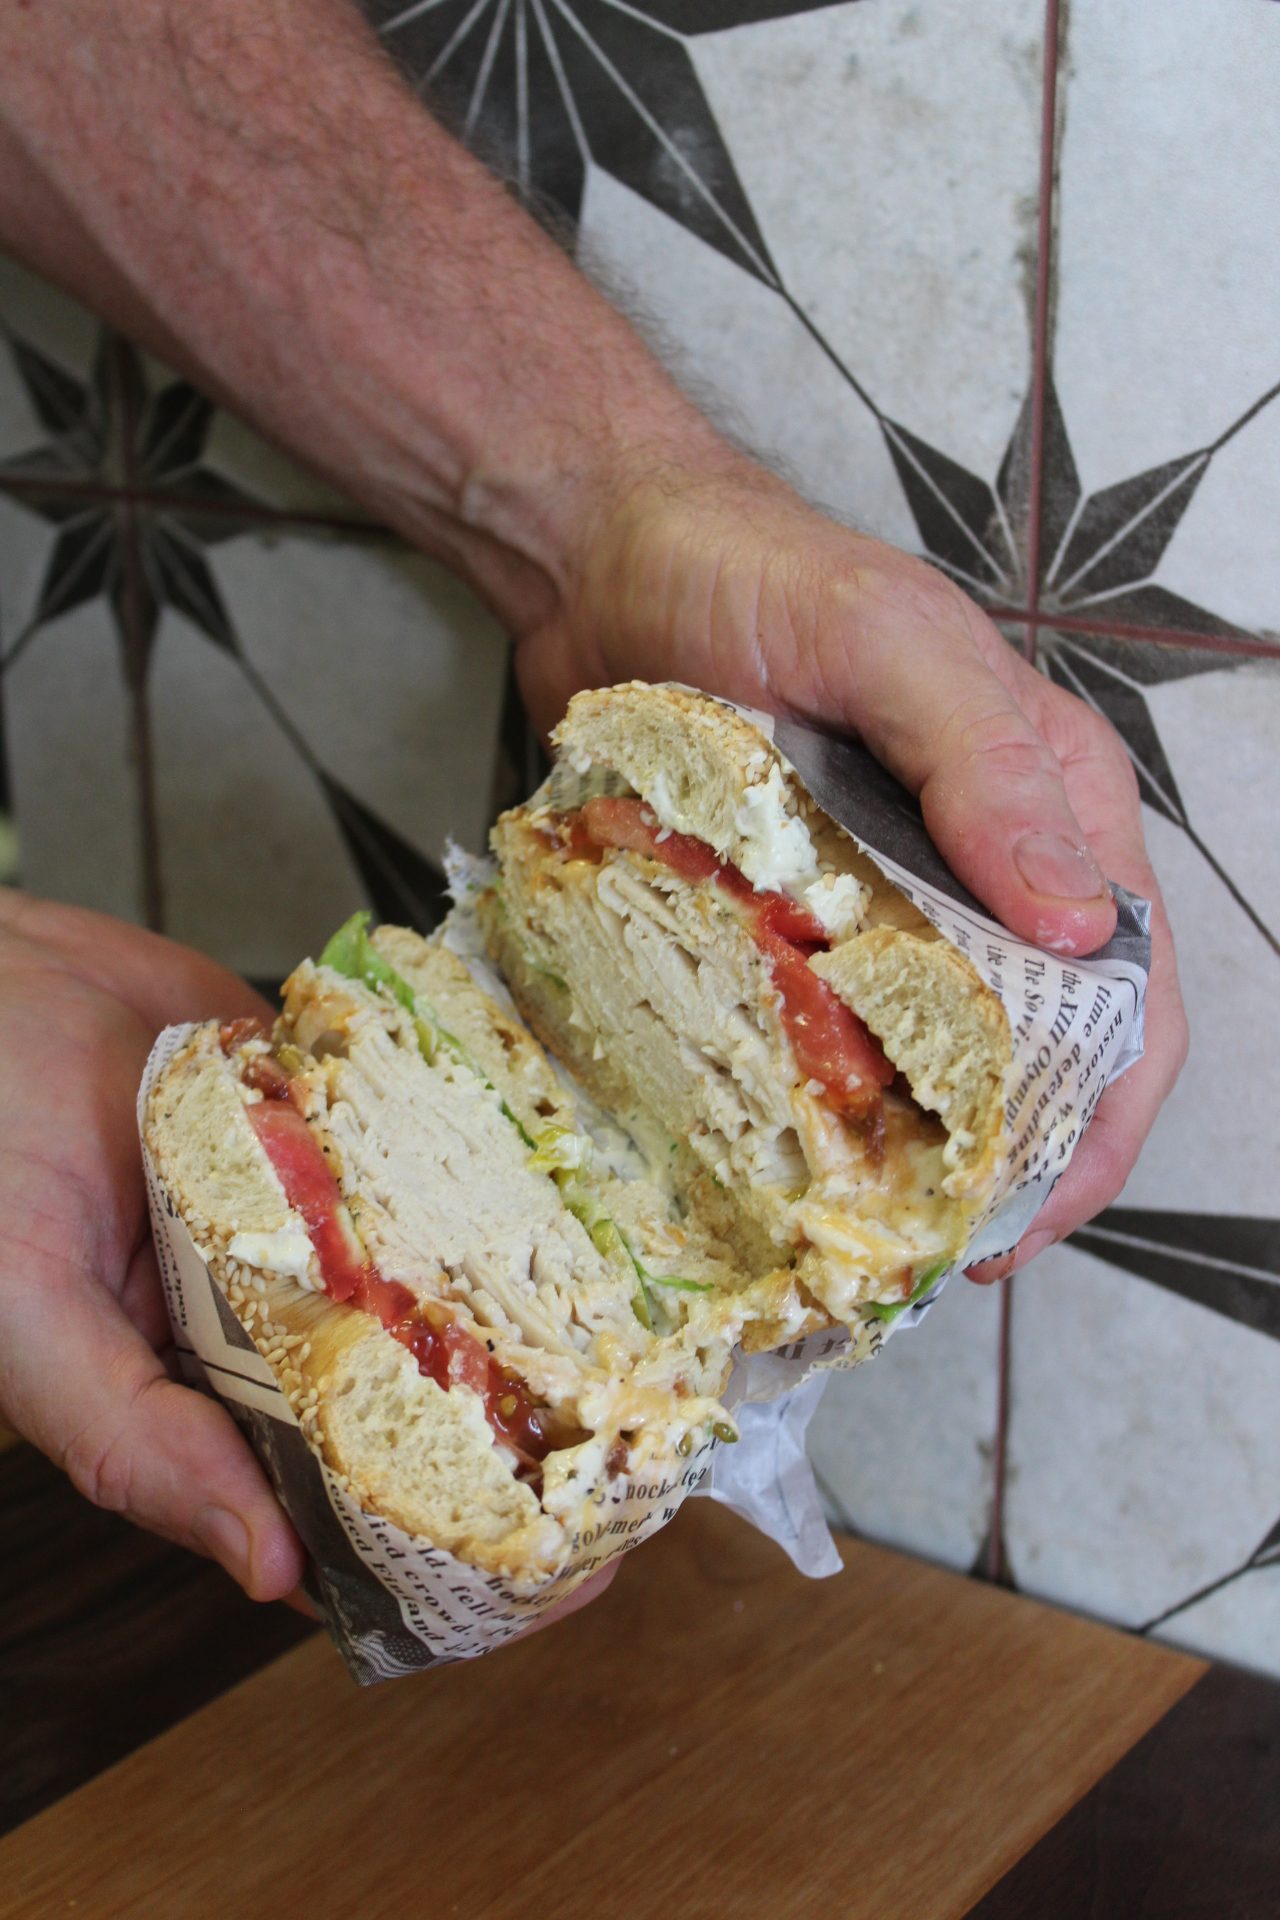 Cupcake company adds bagels to keep going during COVID